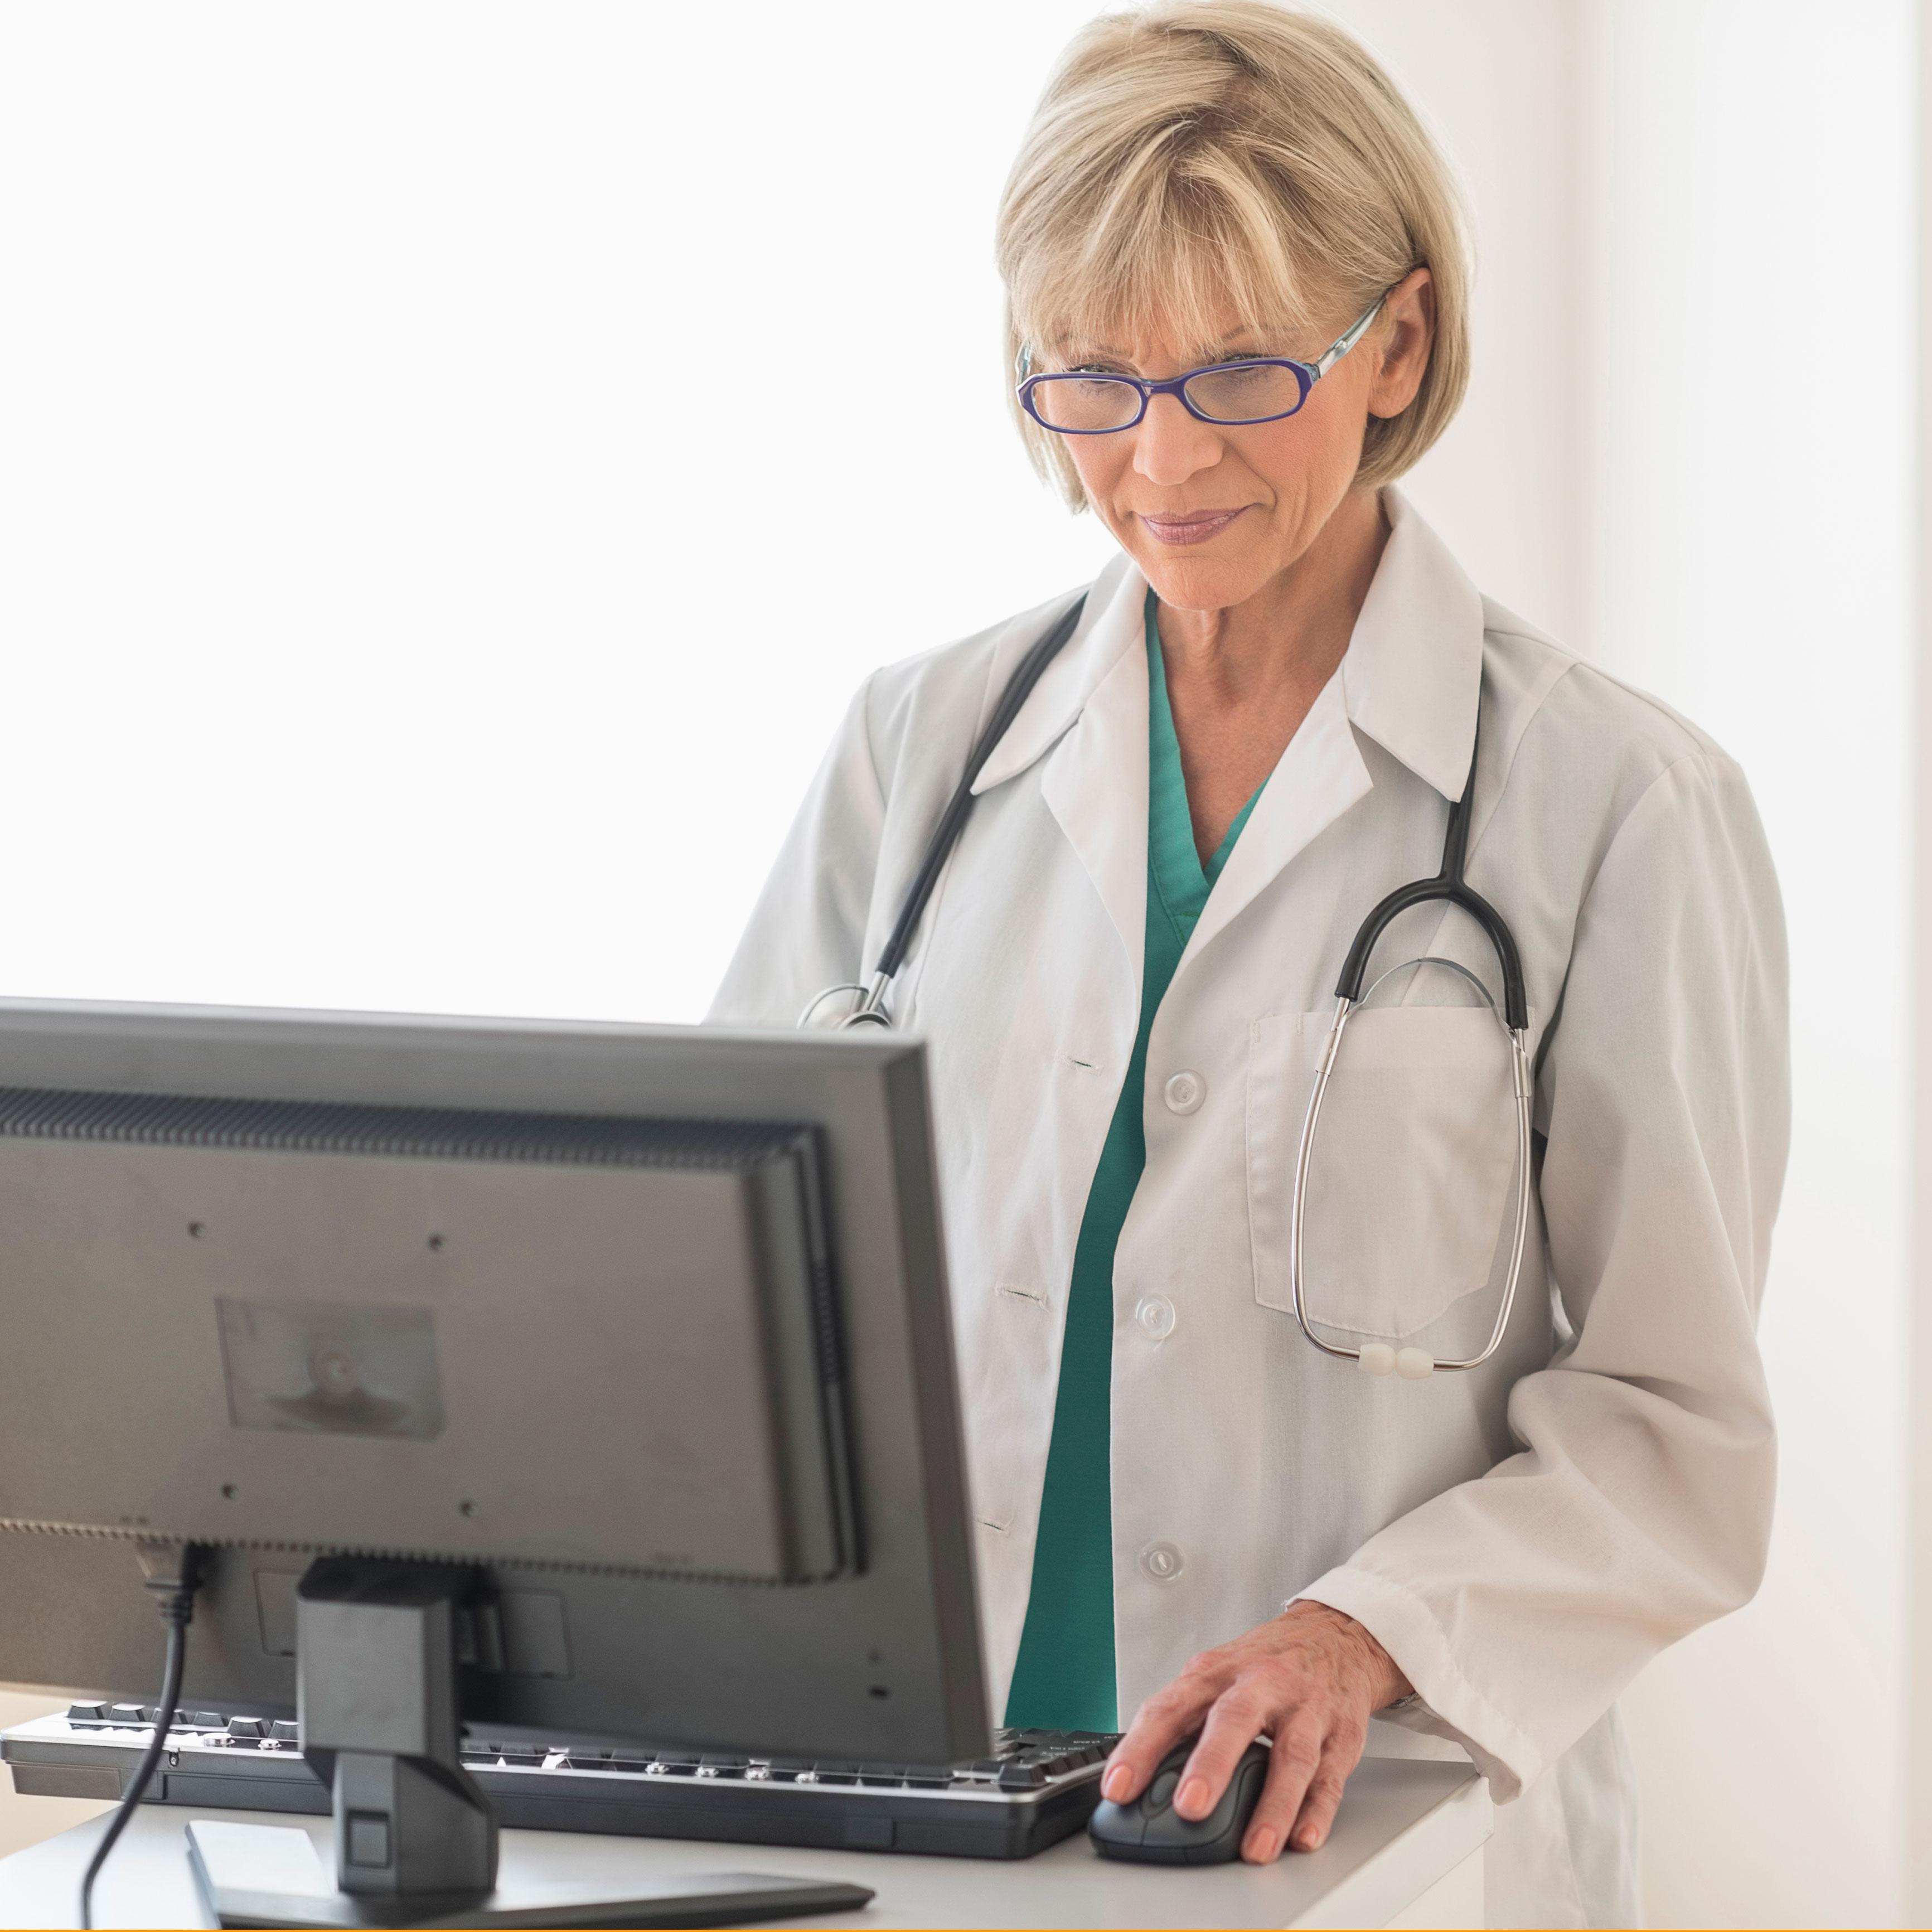 Image of a female clinician using a computer in a clinic